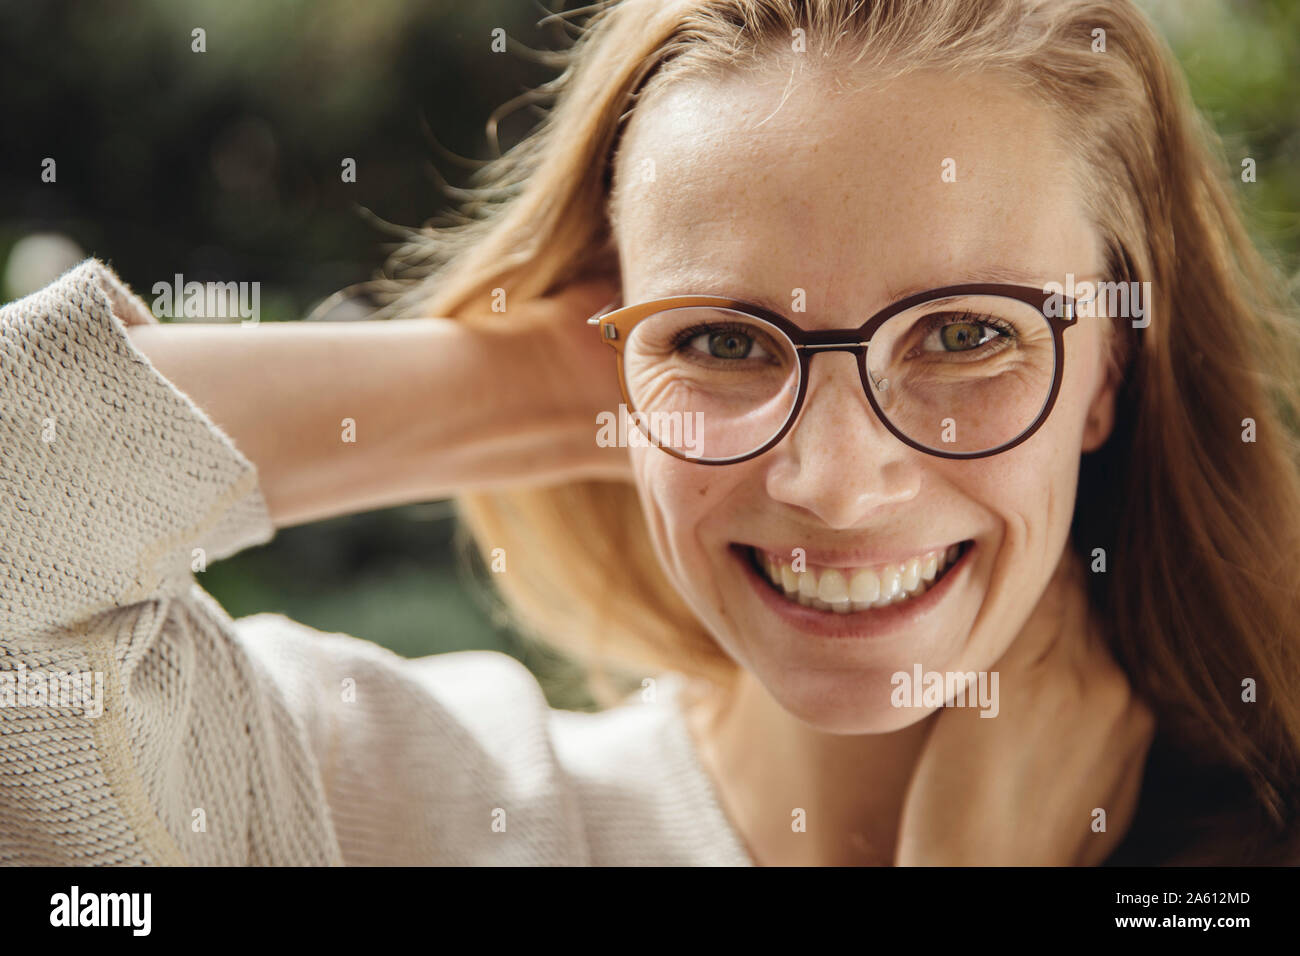 Portrait of happy young woman with glasses Stock Photo